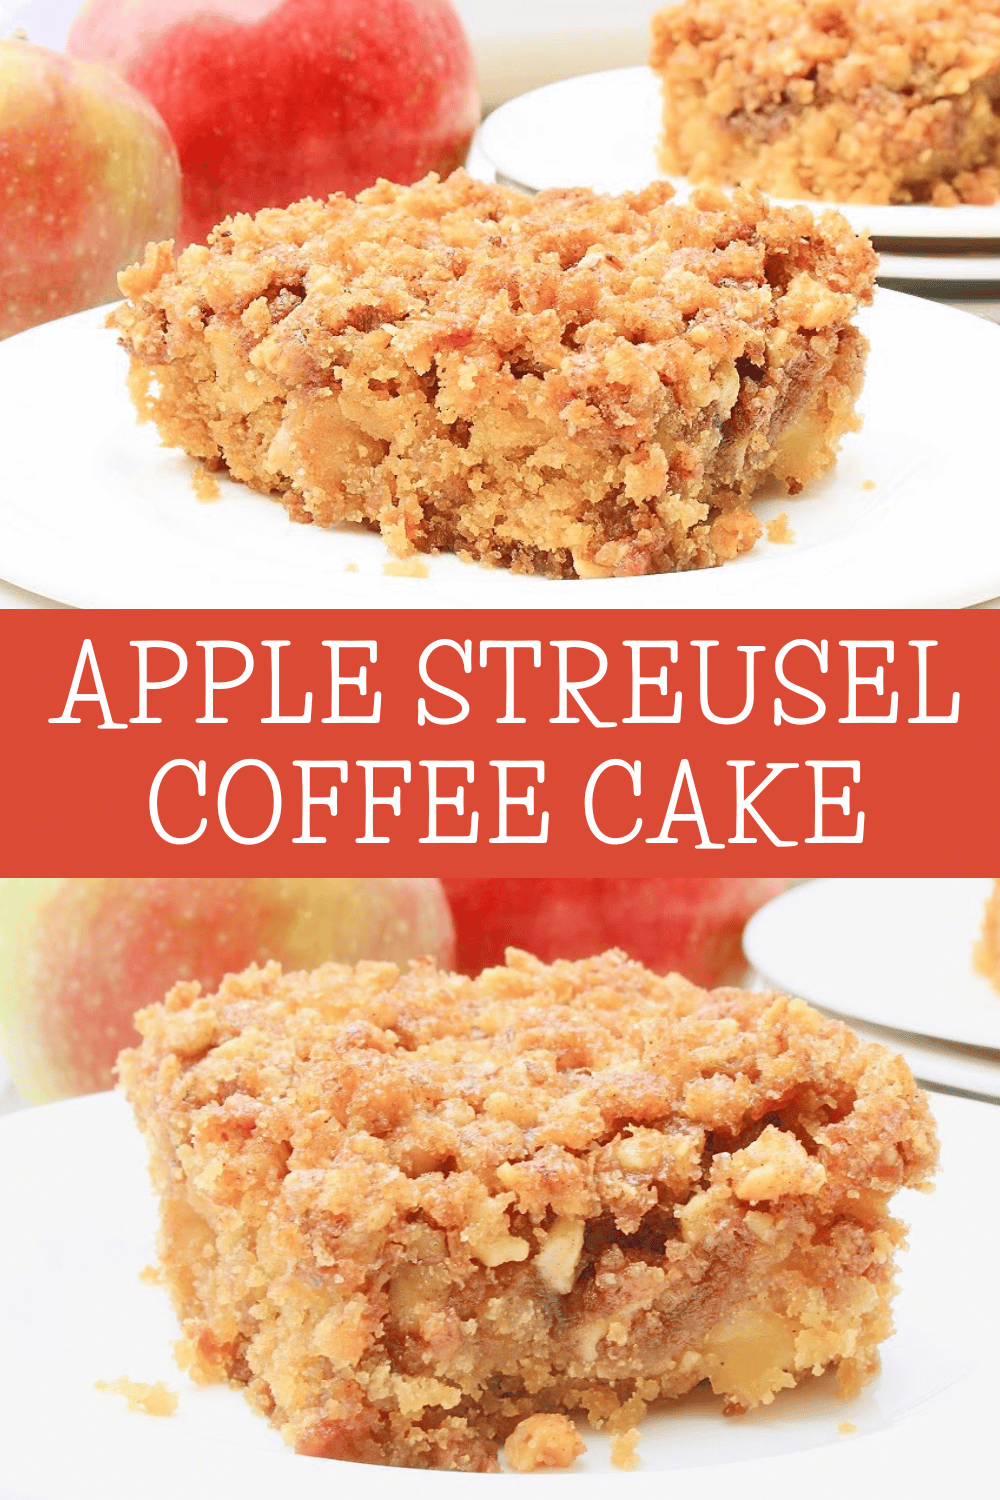 Apple Streusel Coffee Cake ~ Tender and sweet apple cake topped with crumbly and buttery cinnamon streusel. Serve this autumn treat for breakfast, brunch, or dessert! via @thiswifecooks